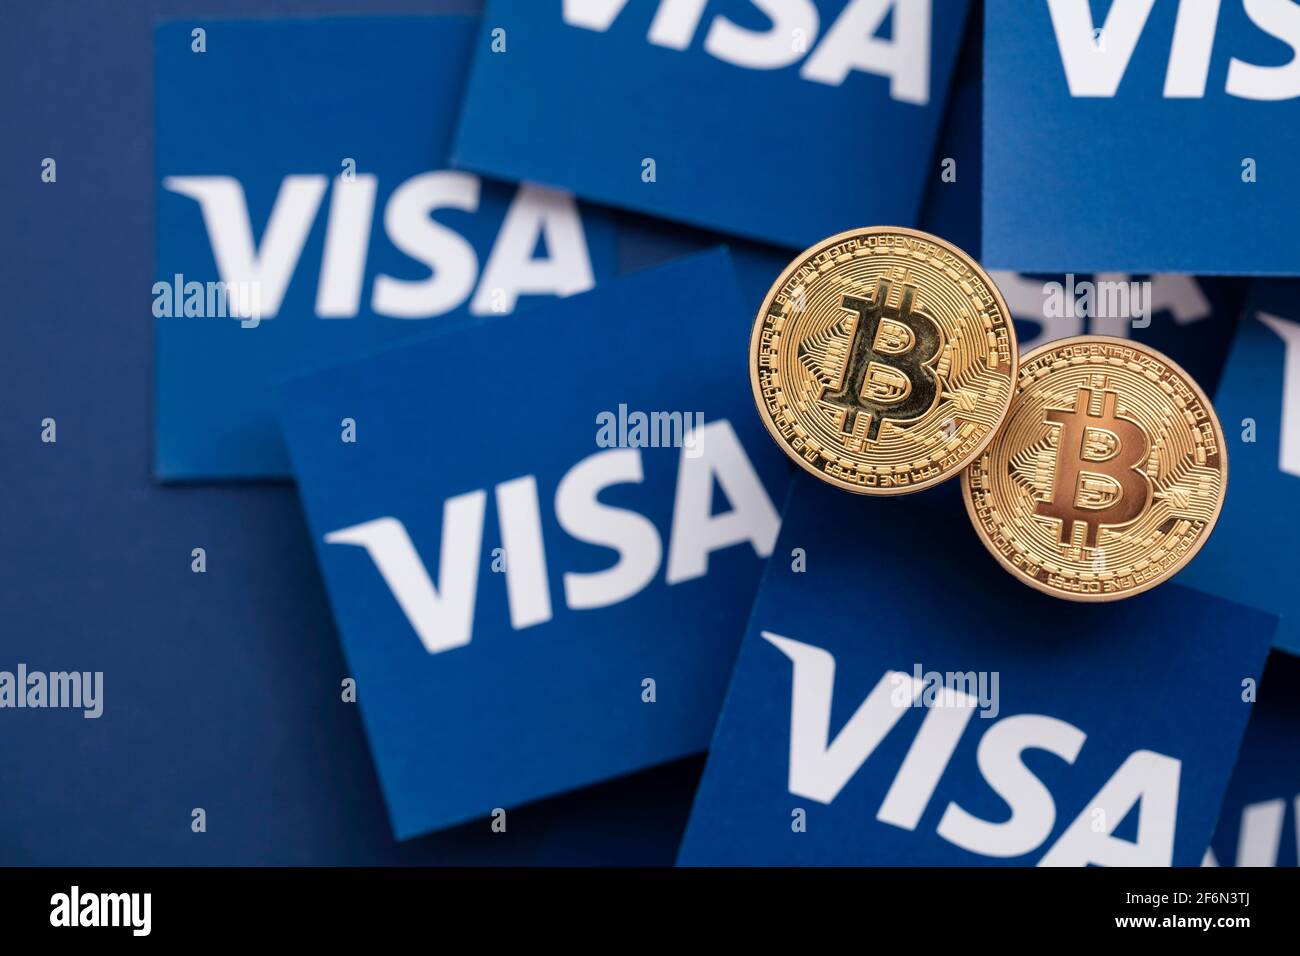 Buy bitcoins with visa uk what cryptocurrency should i invest in 2019